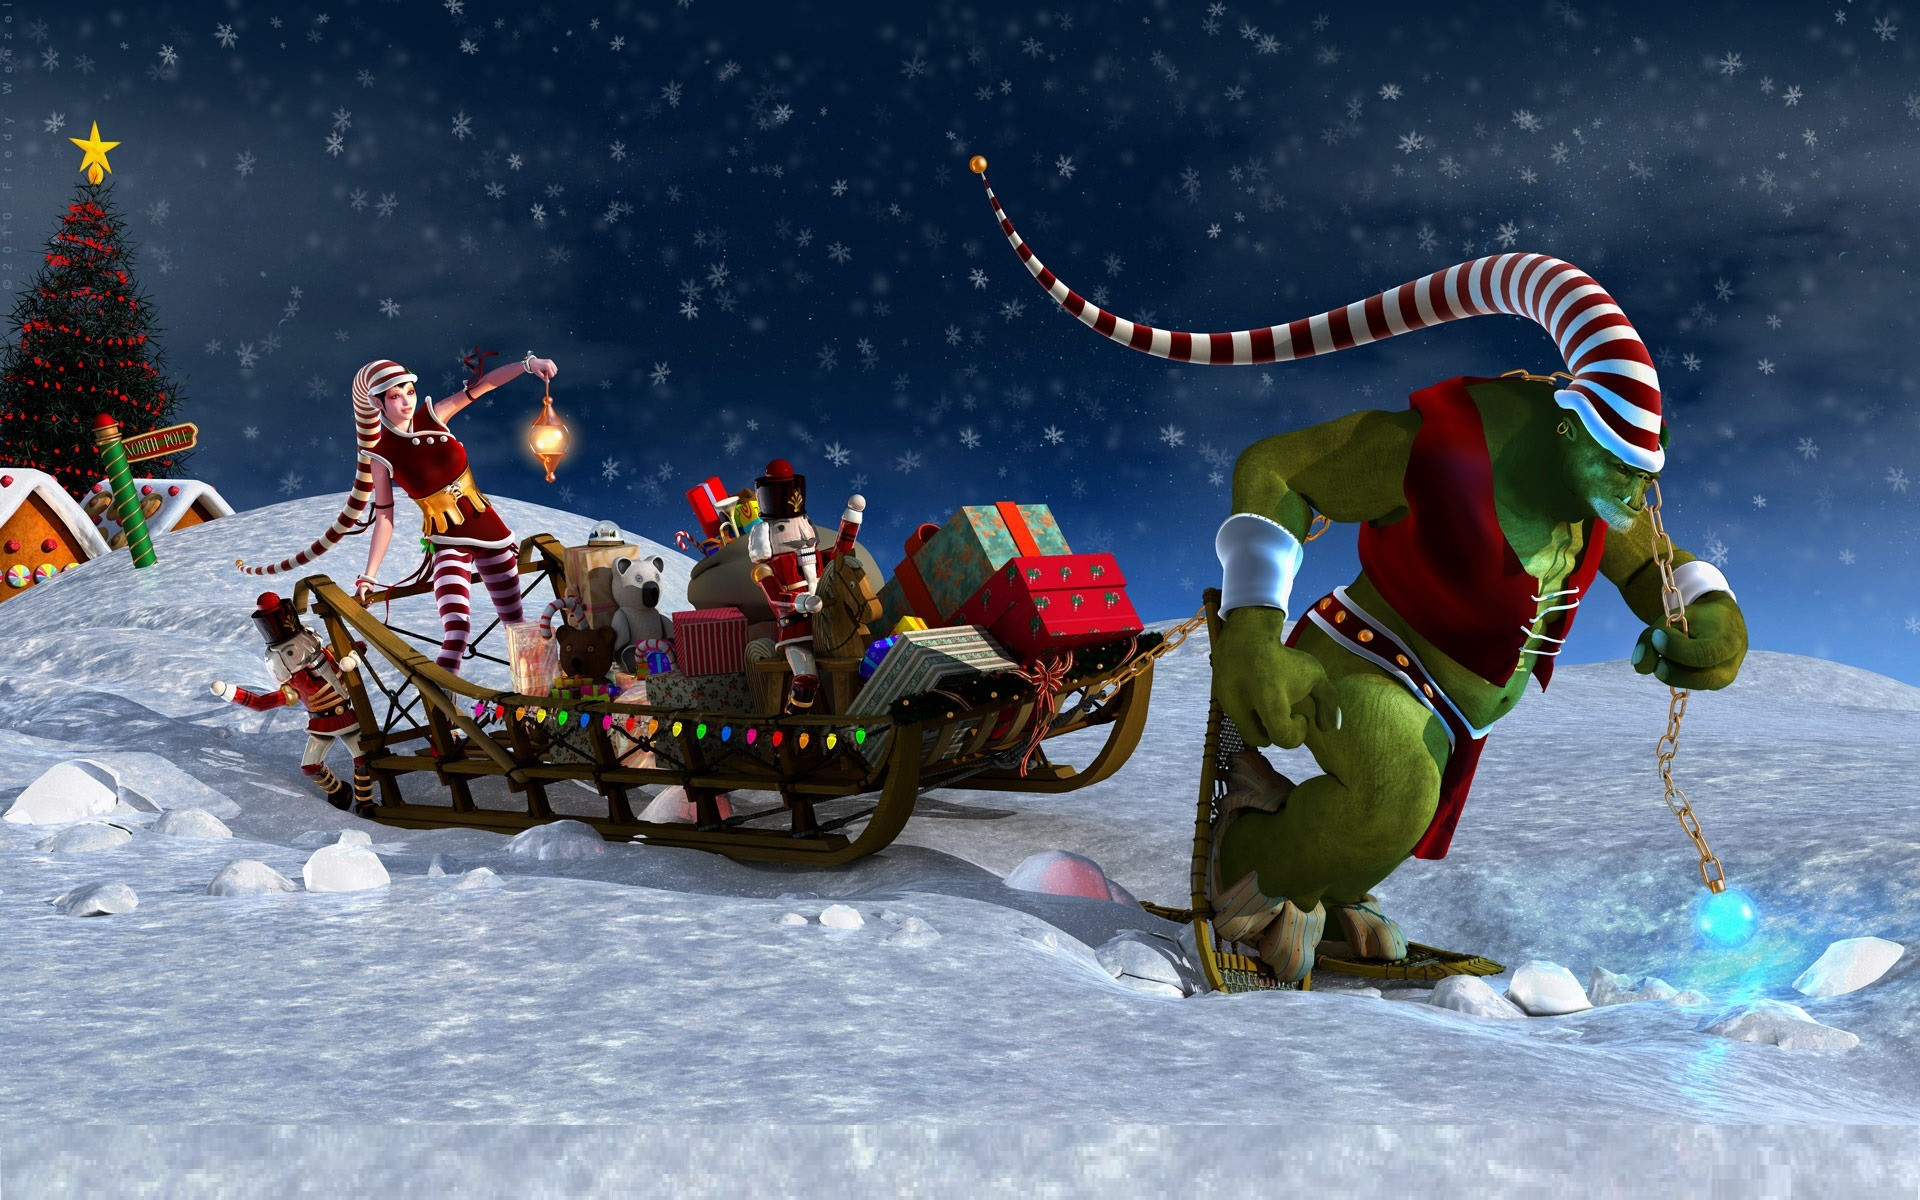 Free 3D Christmas Wallpaper
 Free 3D Animated Christmas Wallpaper WallpaperSafari